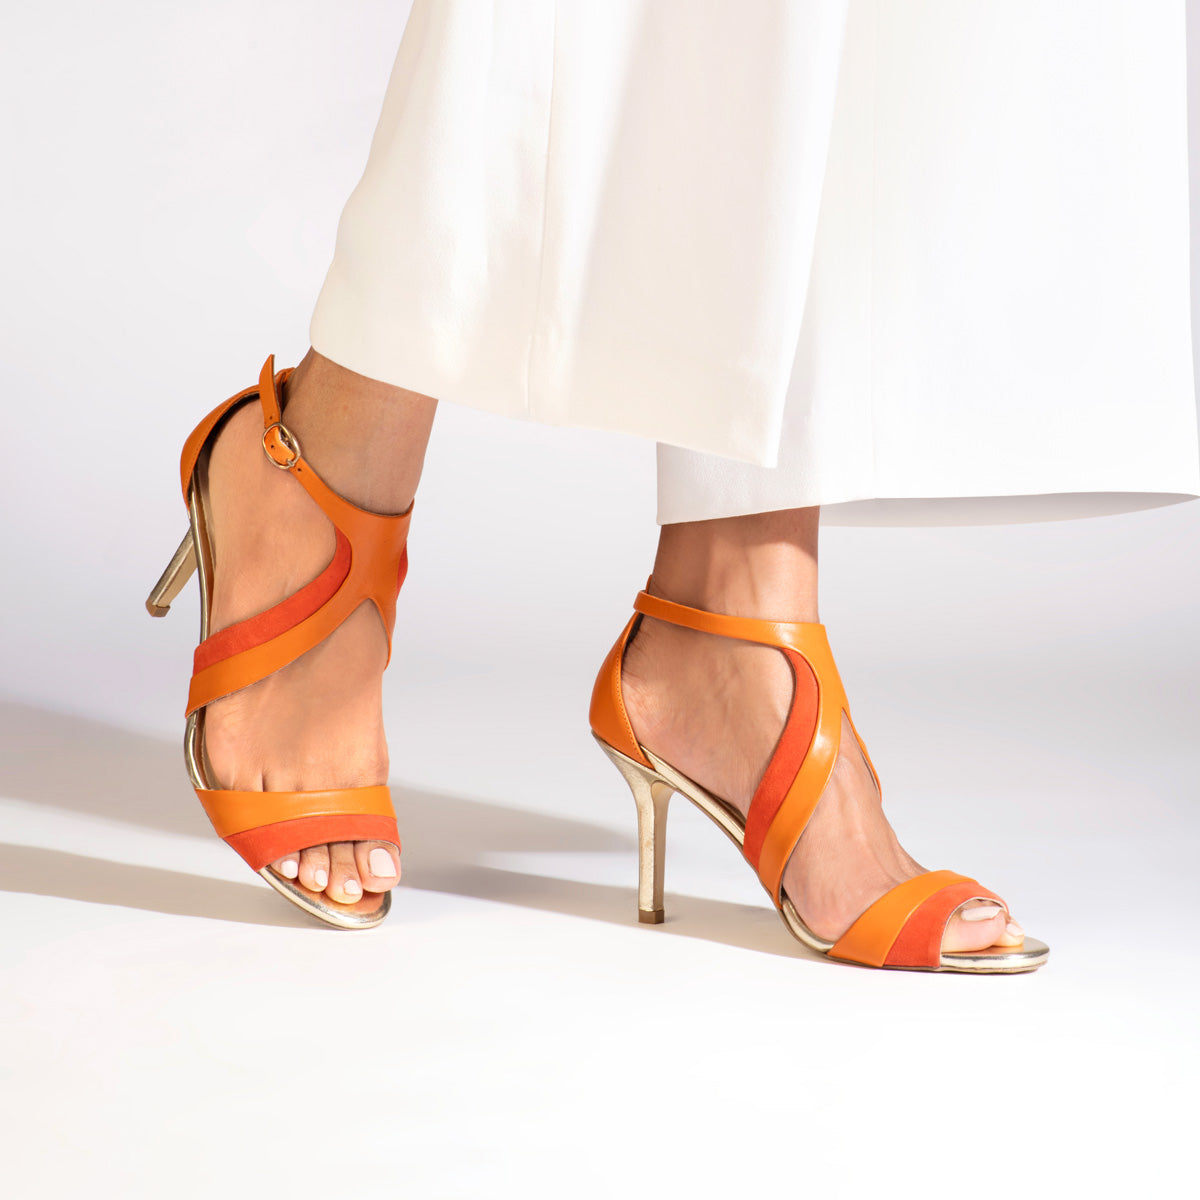 Guide: How to Choose the Best Party Heels for Your Feet